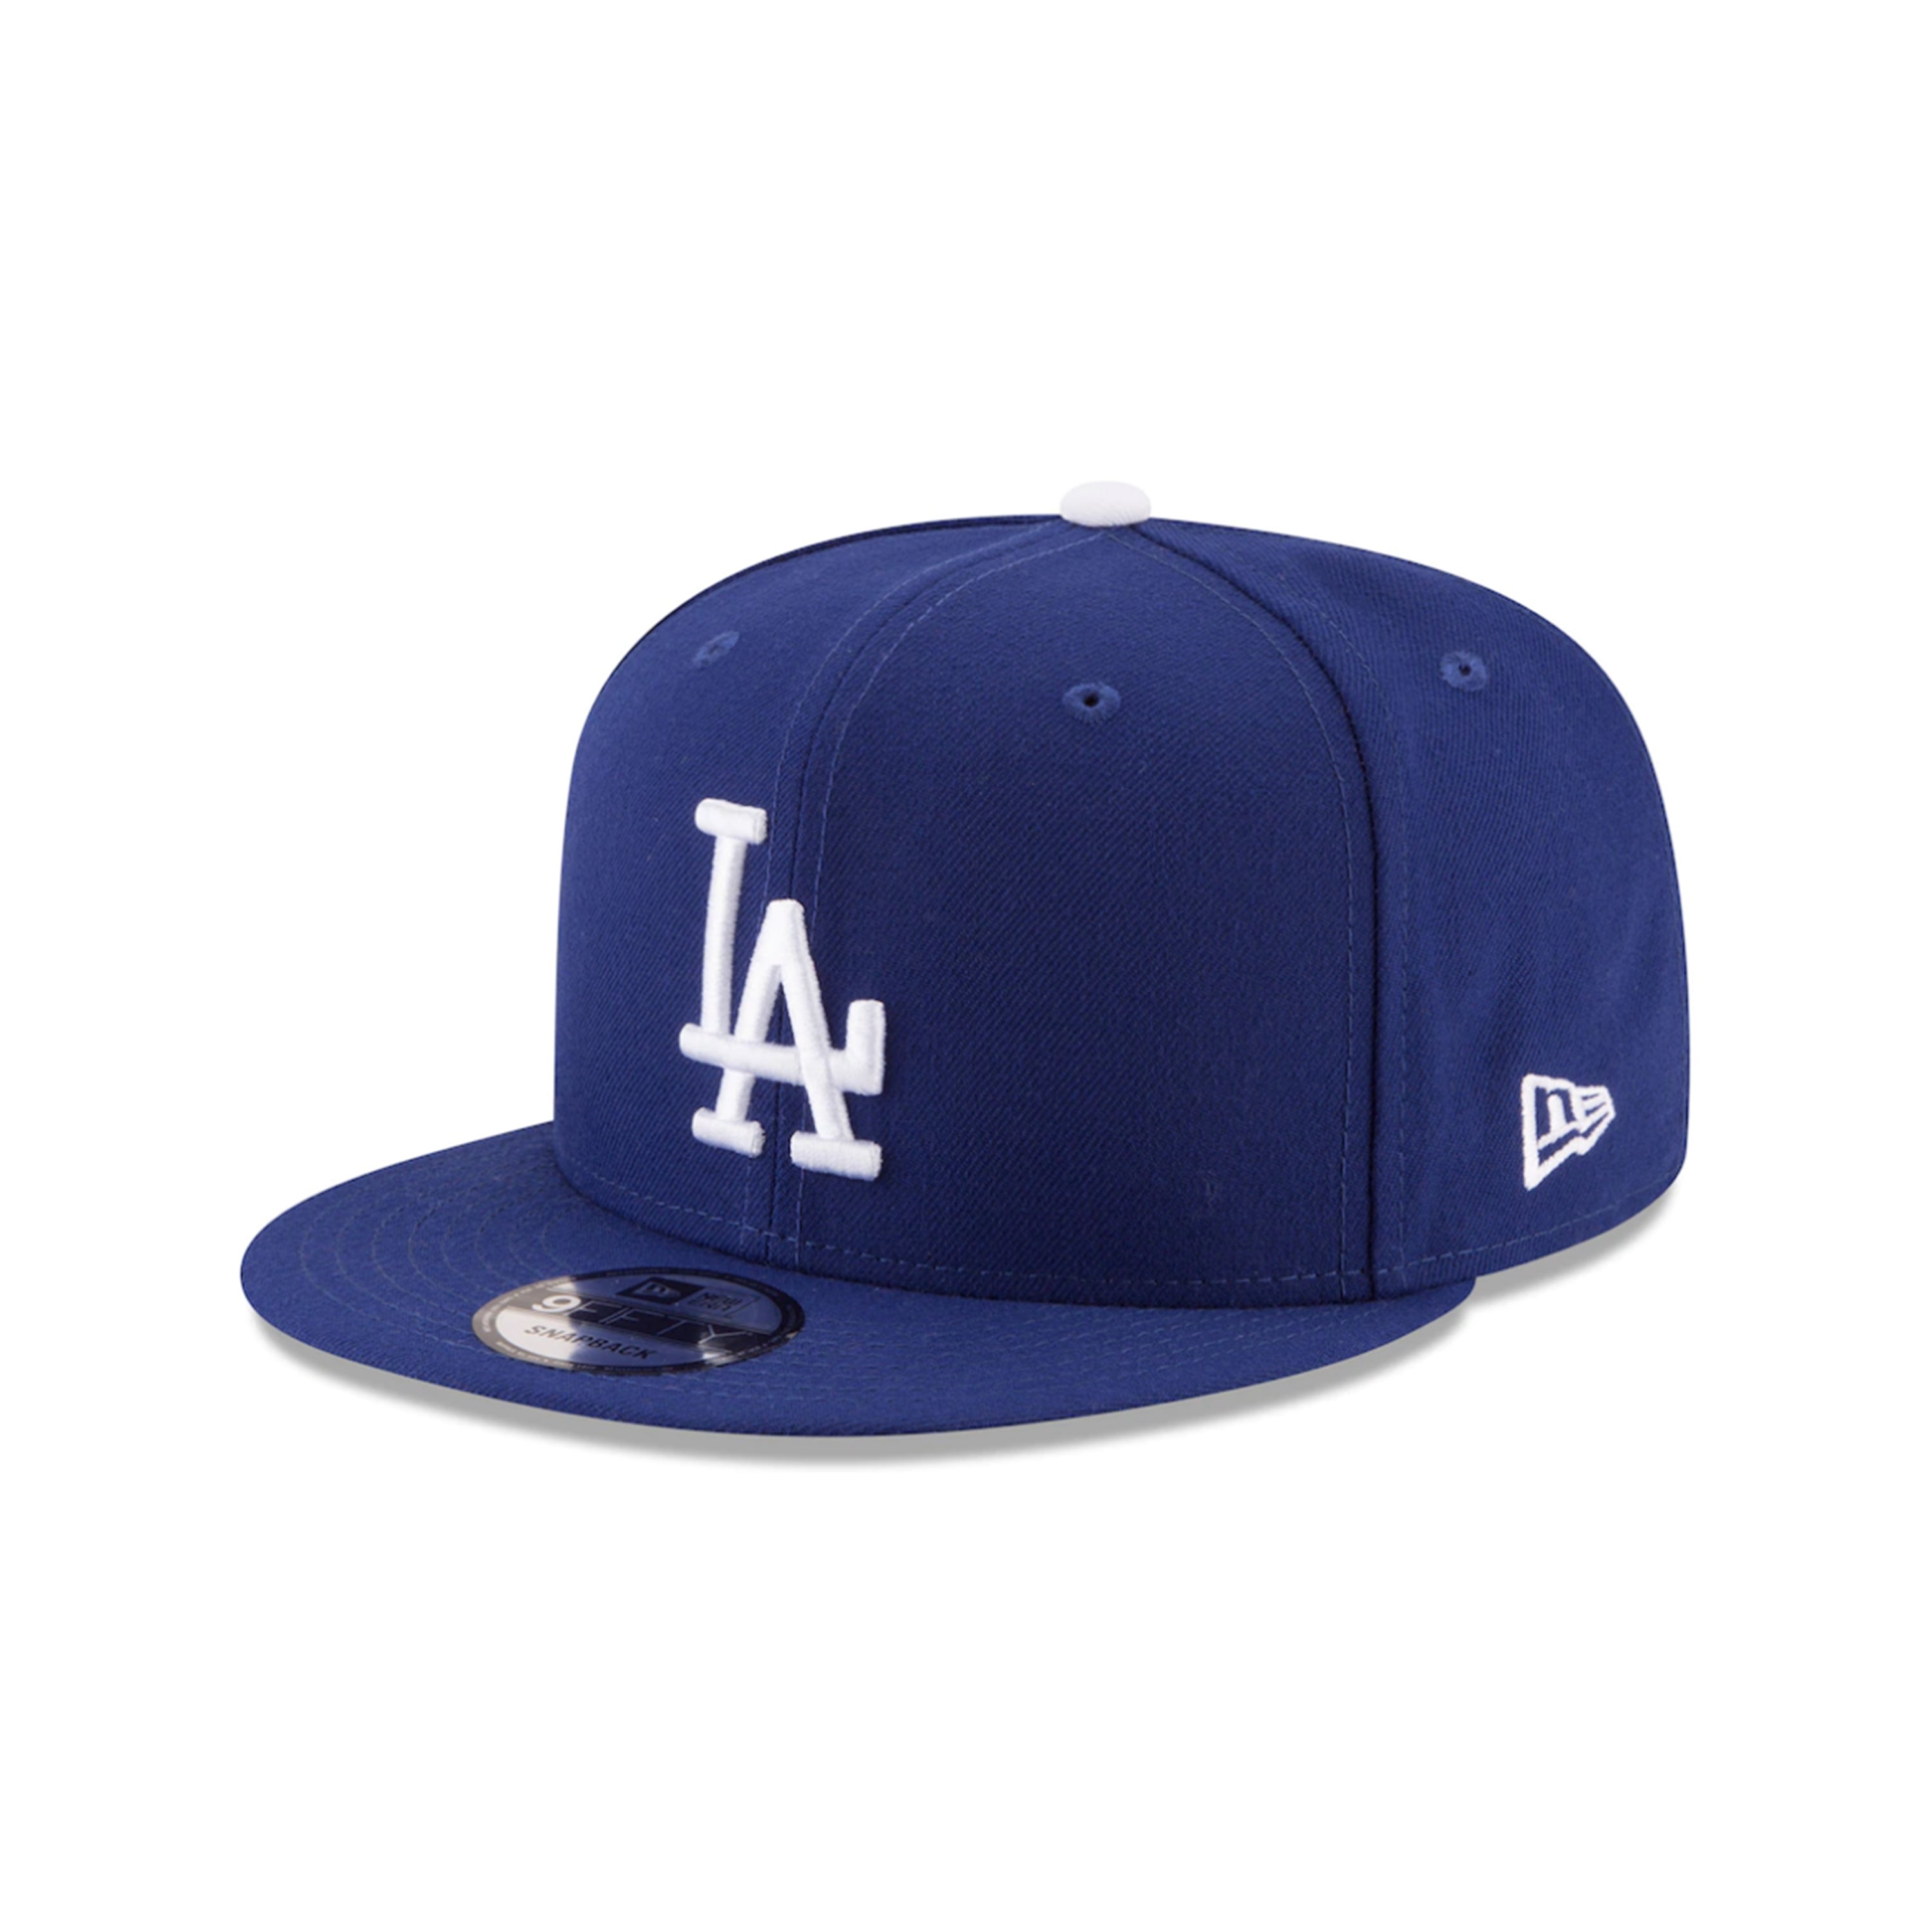 Los Angeles Dodgers Los Doyers MLB Royal 9Fifty Snapback – CROWN MINDED